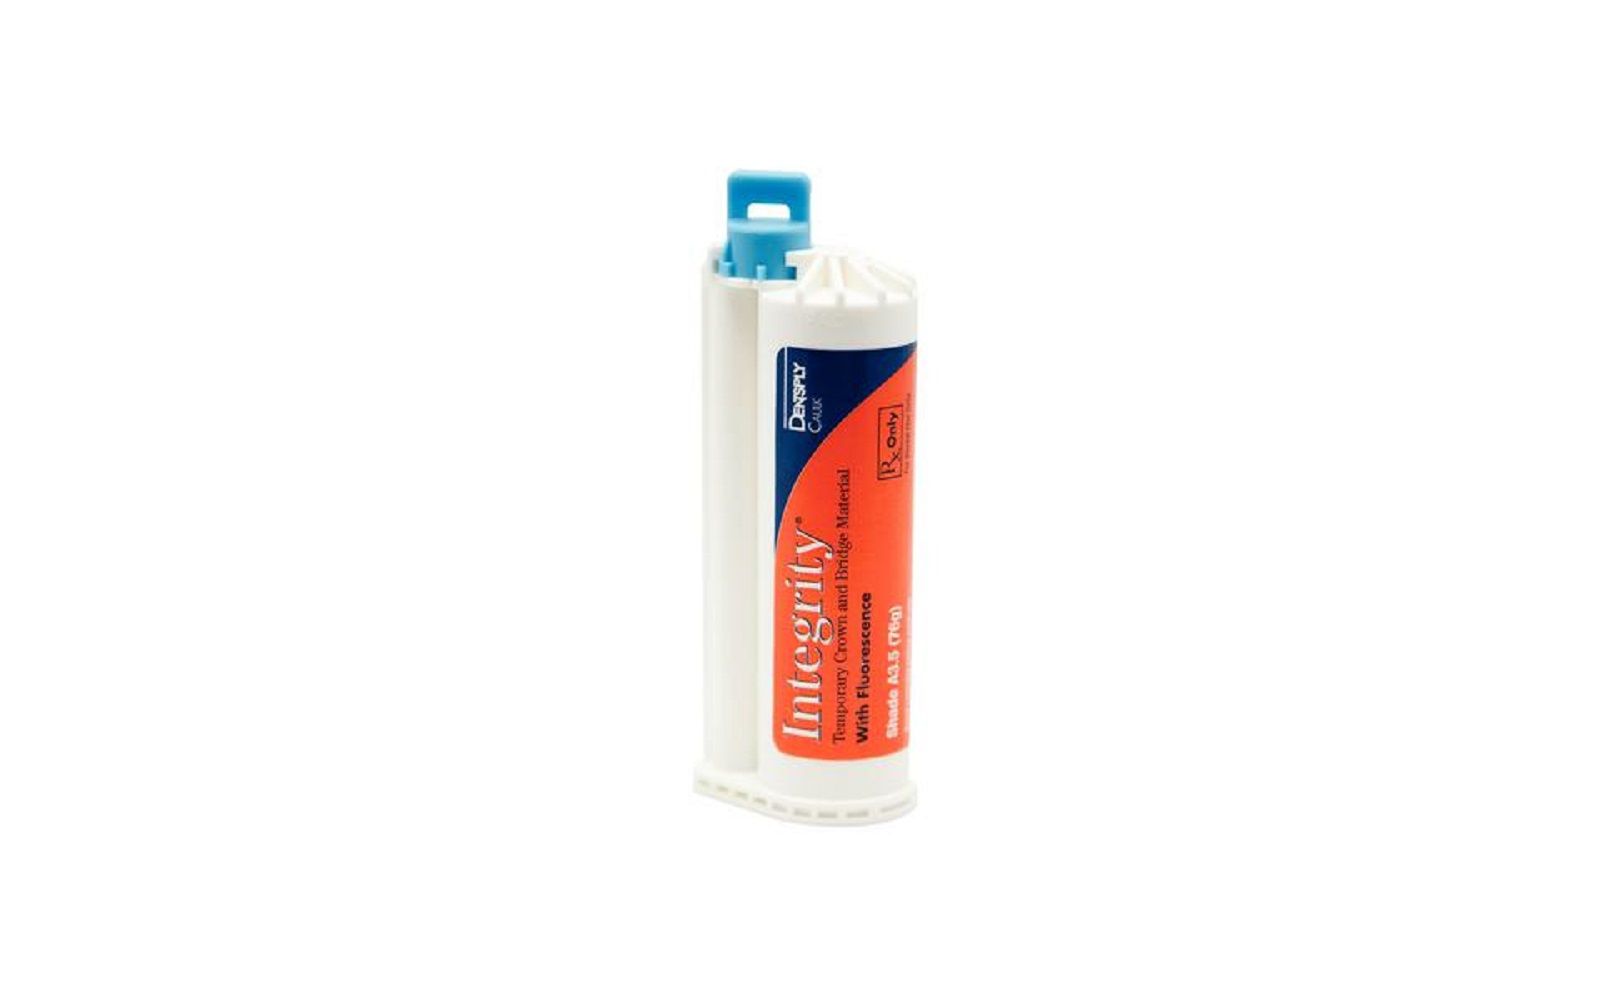 Integrity® temporary crown and bridge material with fluorescence, 76 g cartridge refill with mixing tips - dentsply caulk